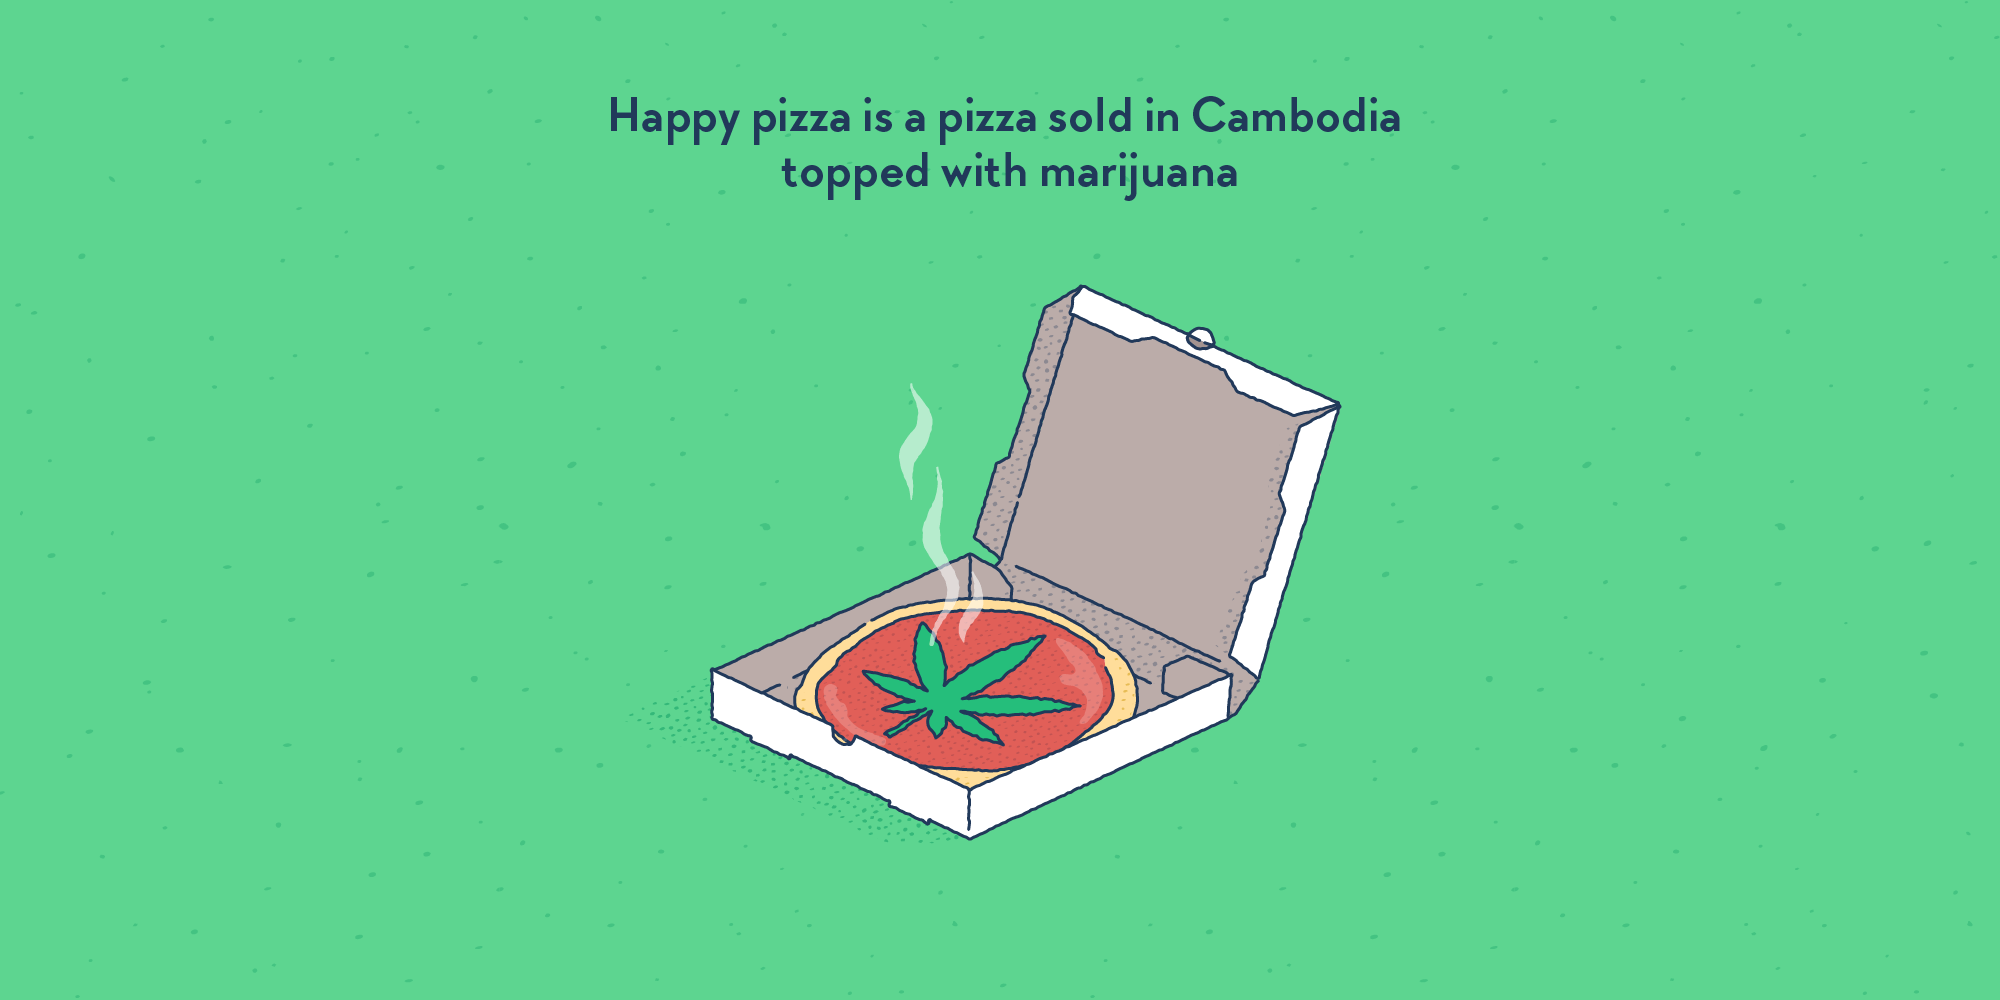 A large cannabis leaf on a pizza in a box.